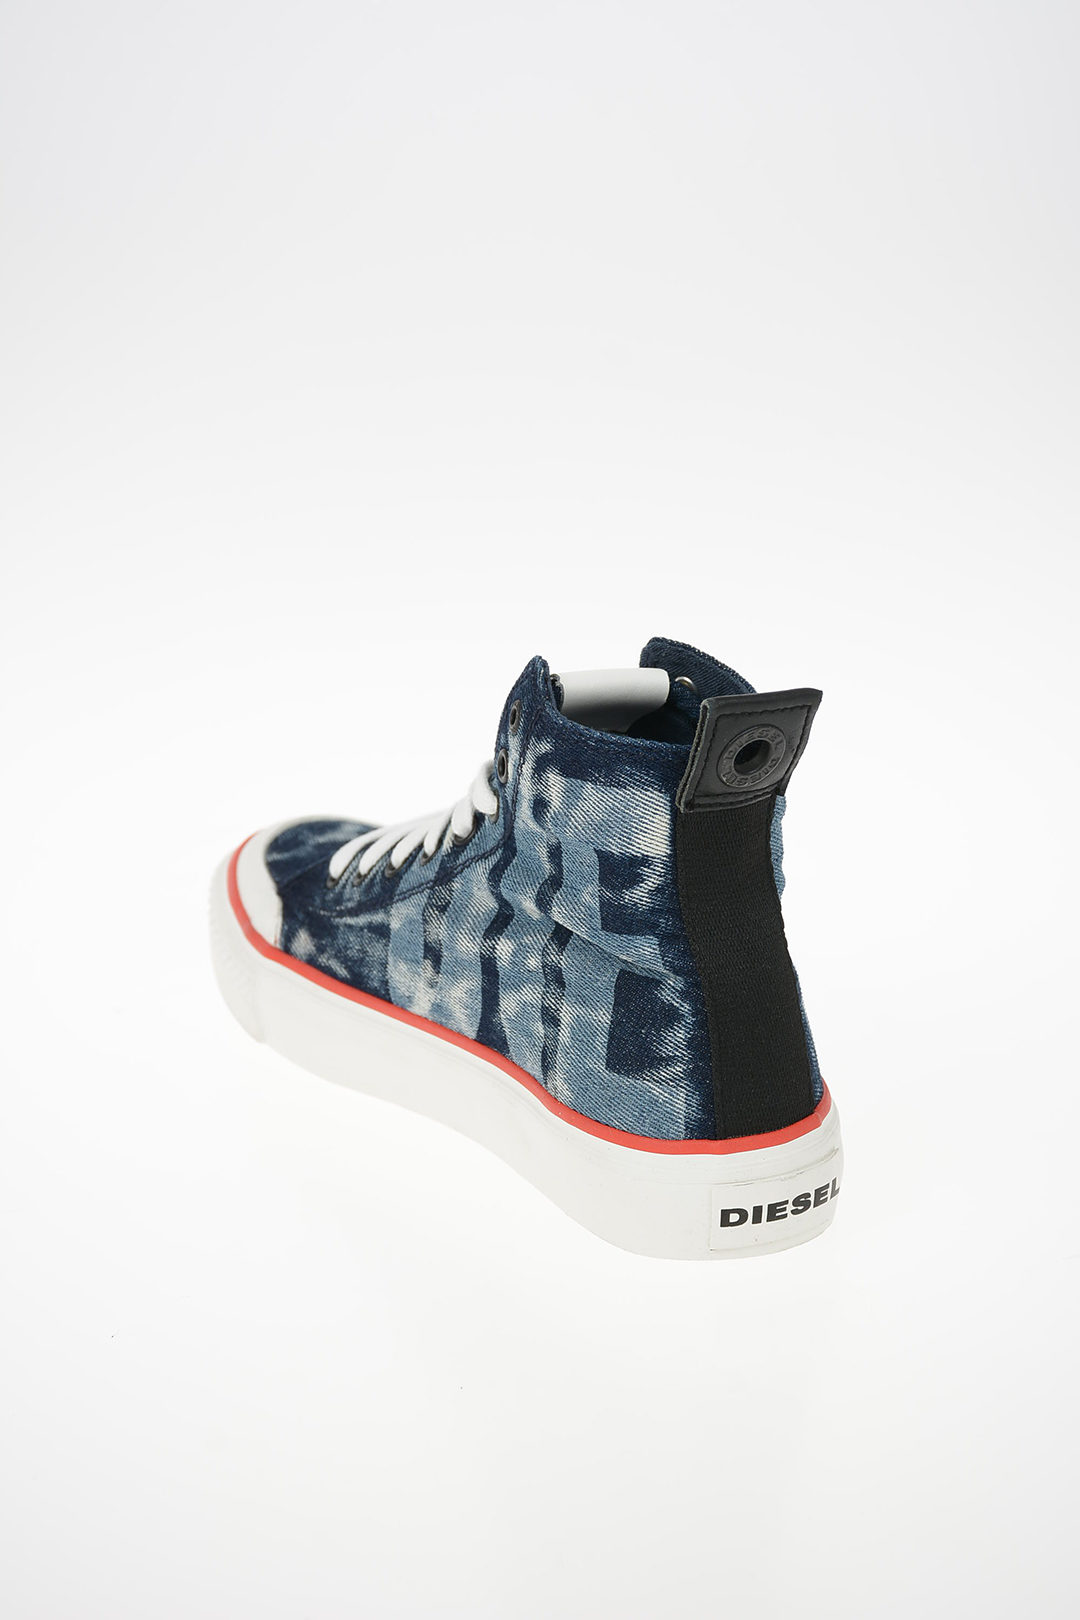 Diesel Sneakers ASTICO in Denim donna - Glamood Outlet